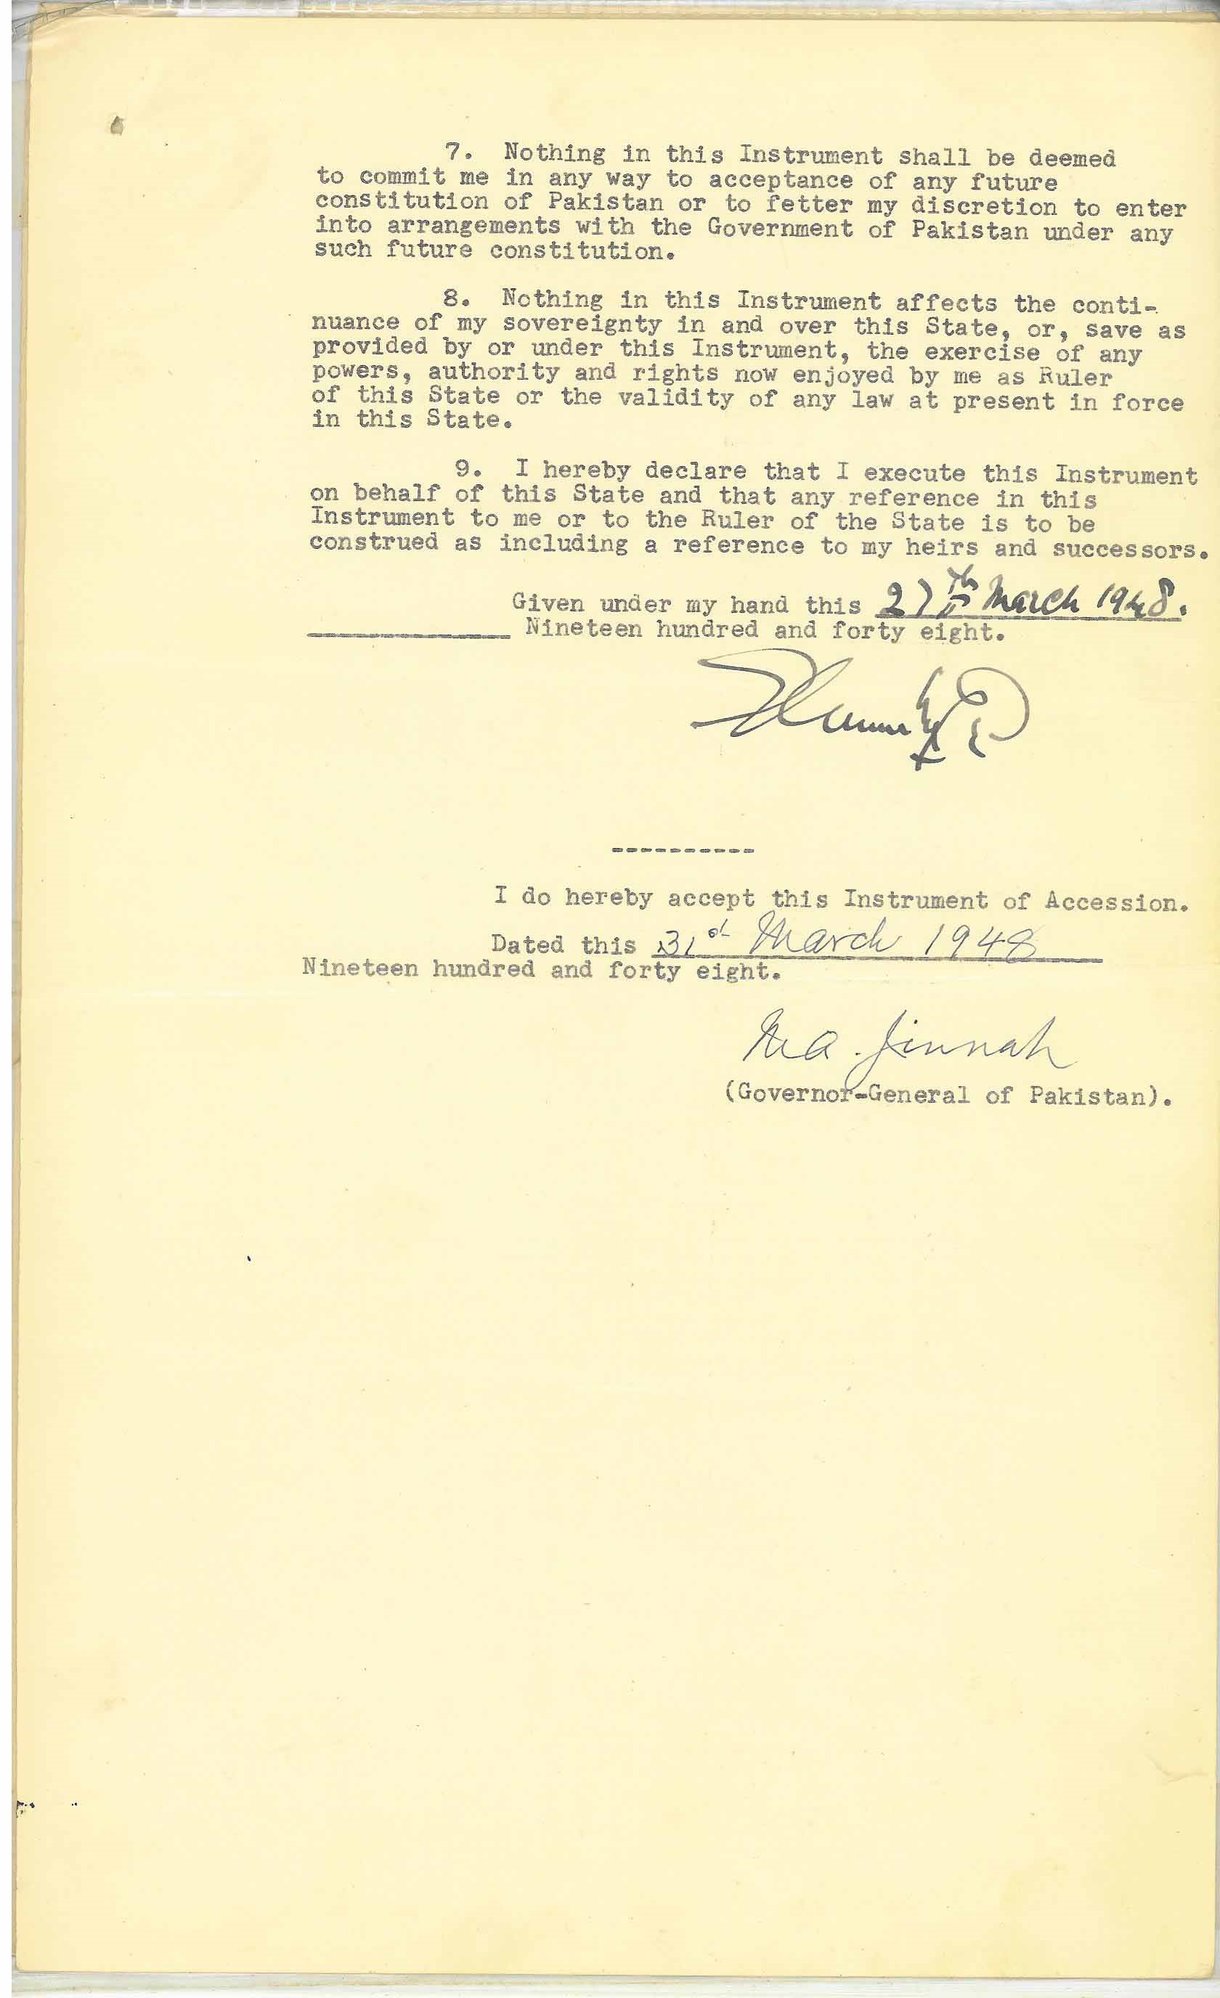 Instrument of Accession of Kalat to Pakistan 27th-31st March 1948_02a.jpg